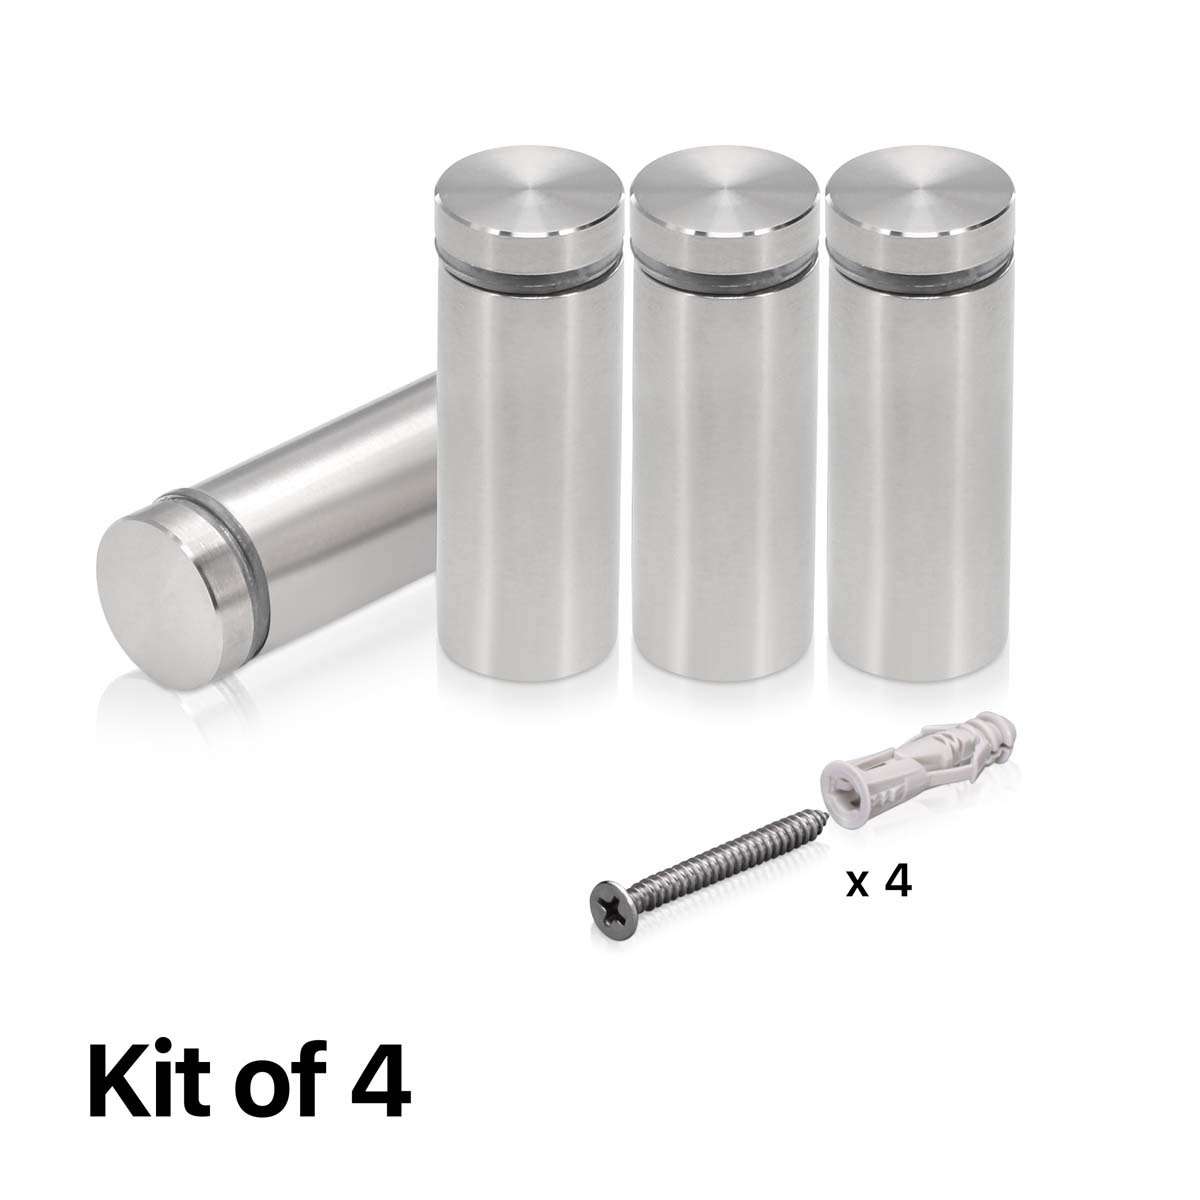 (Set of 4) 3/4'' Diameter X 1-3/4'' Barrel Length, Hollow Stainless Steel Brushed Finish. Easy Fasten Standoff with (4) 2216Z Screws and (4) LANC1 Anchors for concrete or drywall (For Inside Use Only) [Required Material Hole Size: 7/16'']